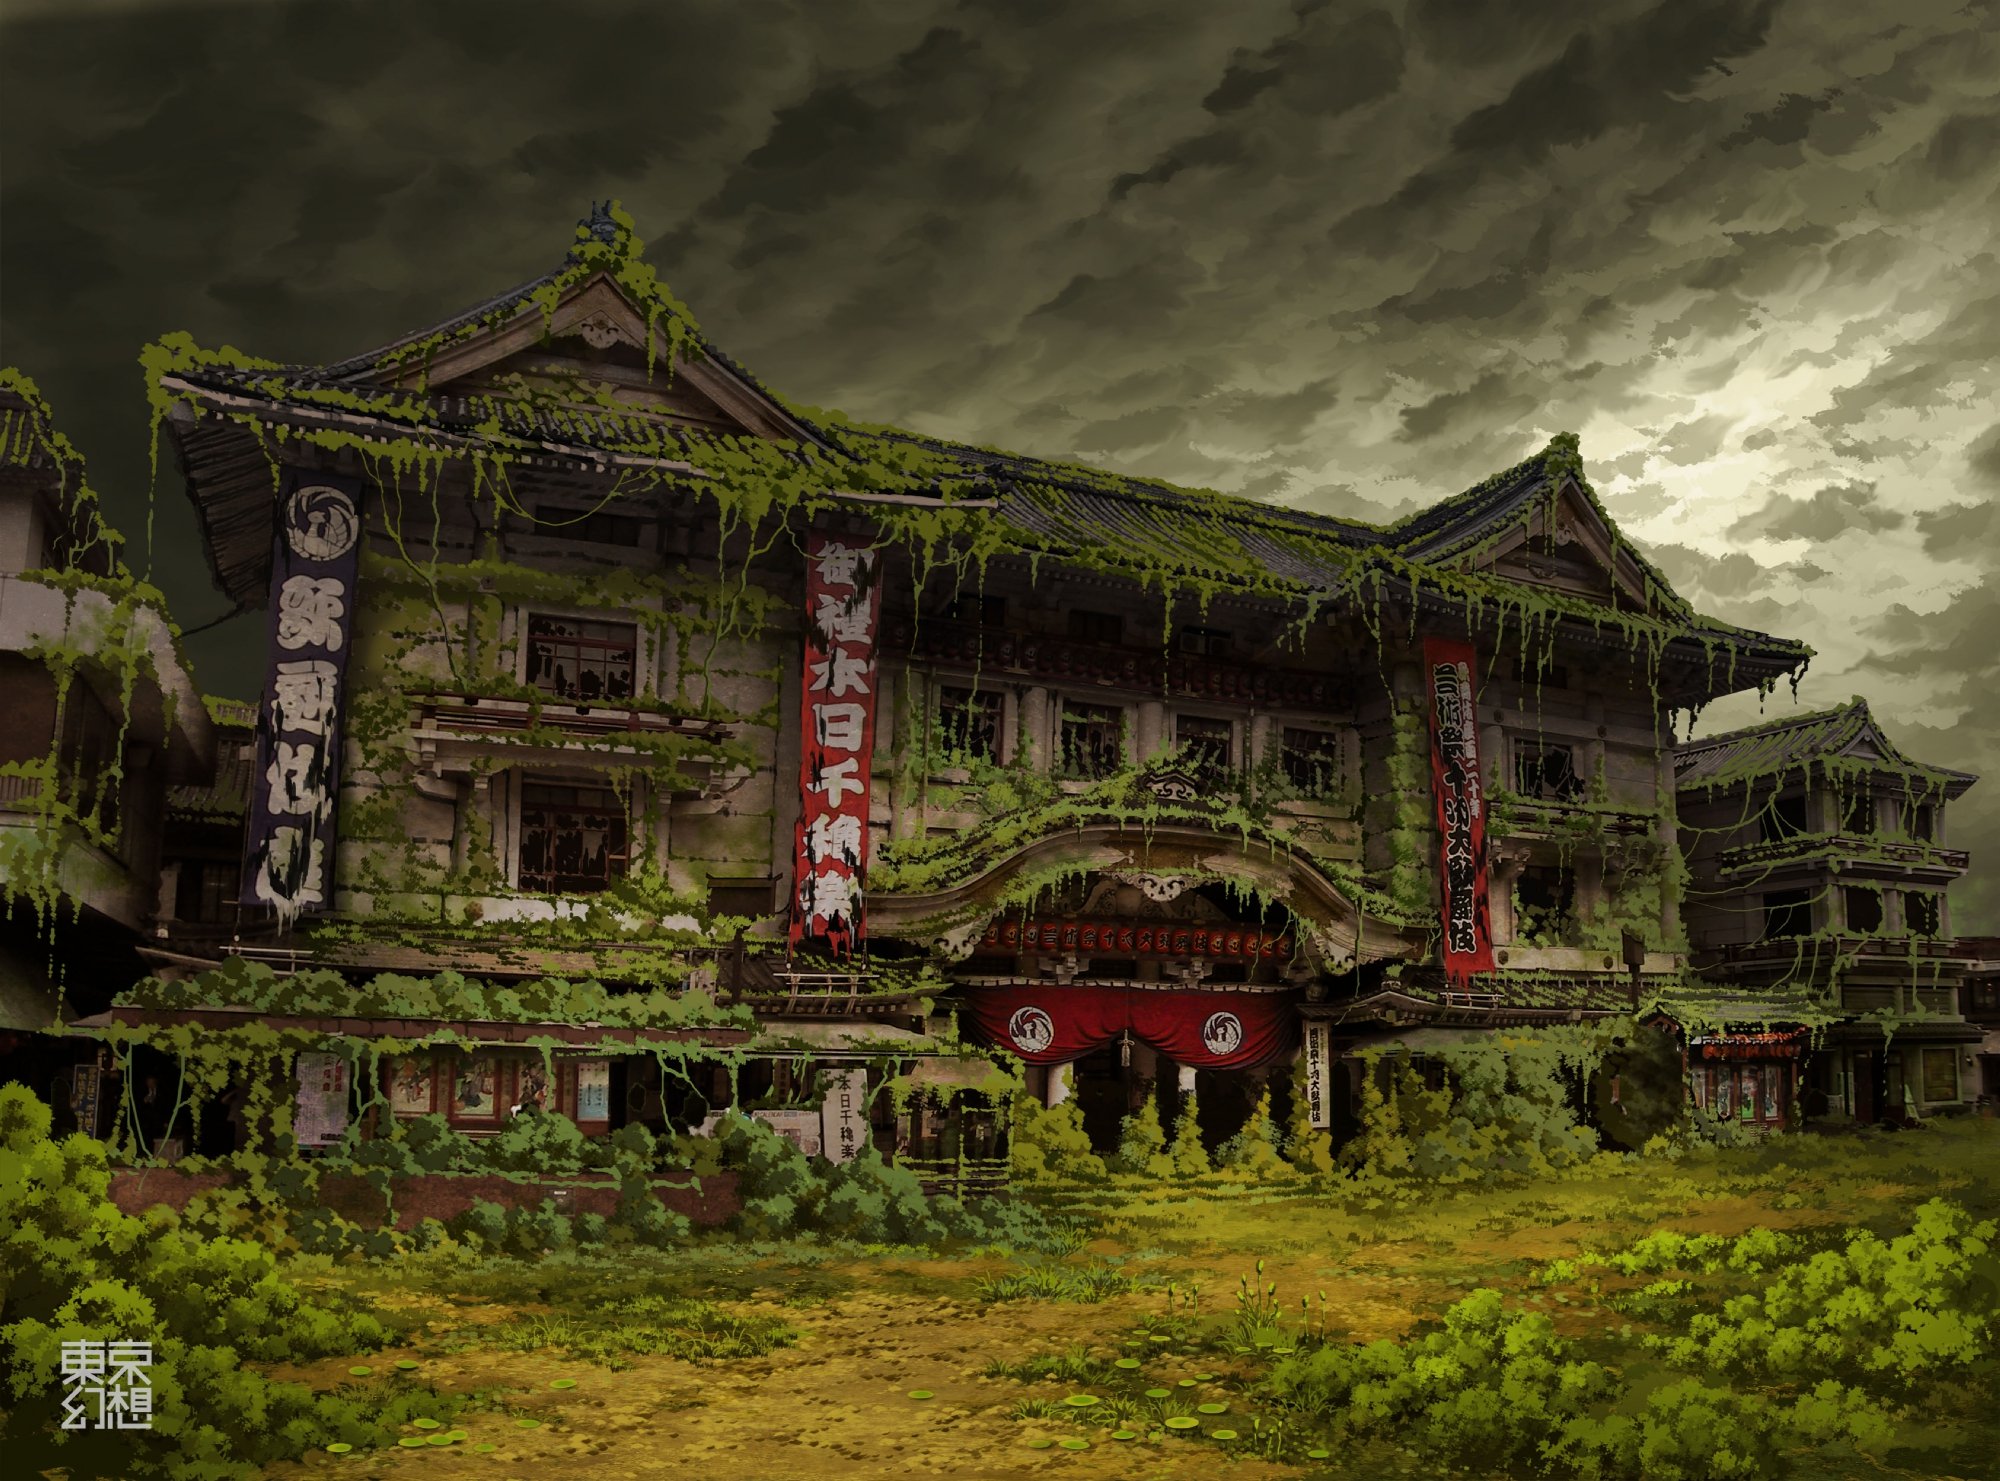 tokyo, Ruins, Post apocalyptic, Buildings, Artwork, Overcast, Asian, Architecture, Ivy, Theatre, Abandoned, Banners, Tokyogenso Wallpaper